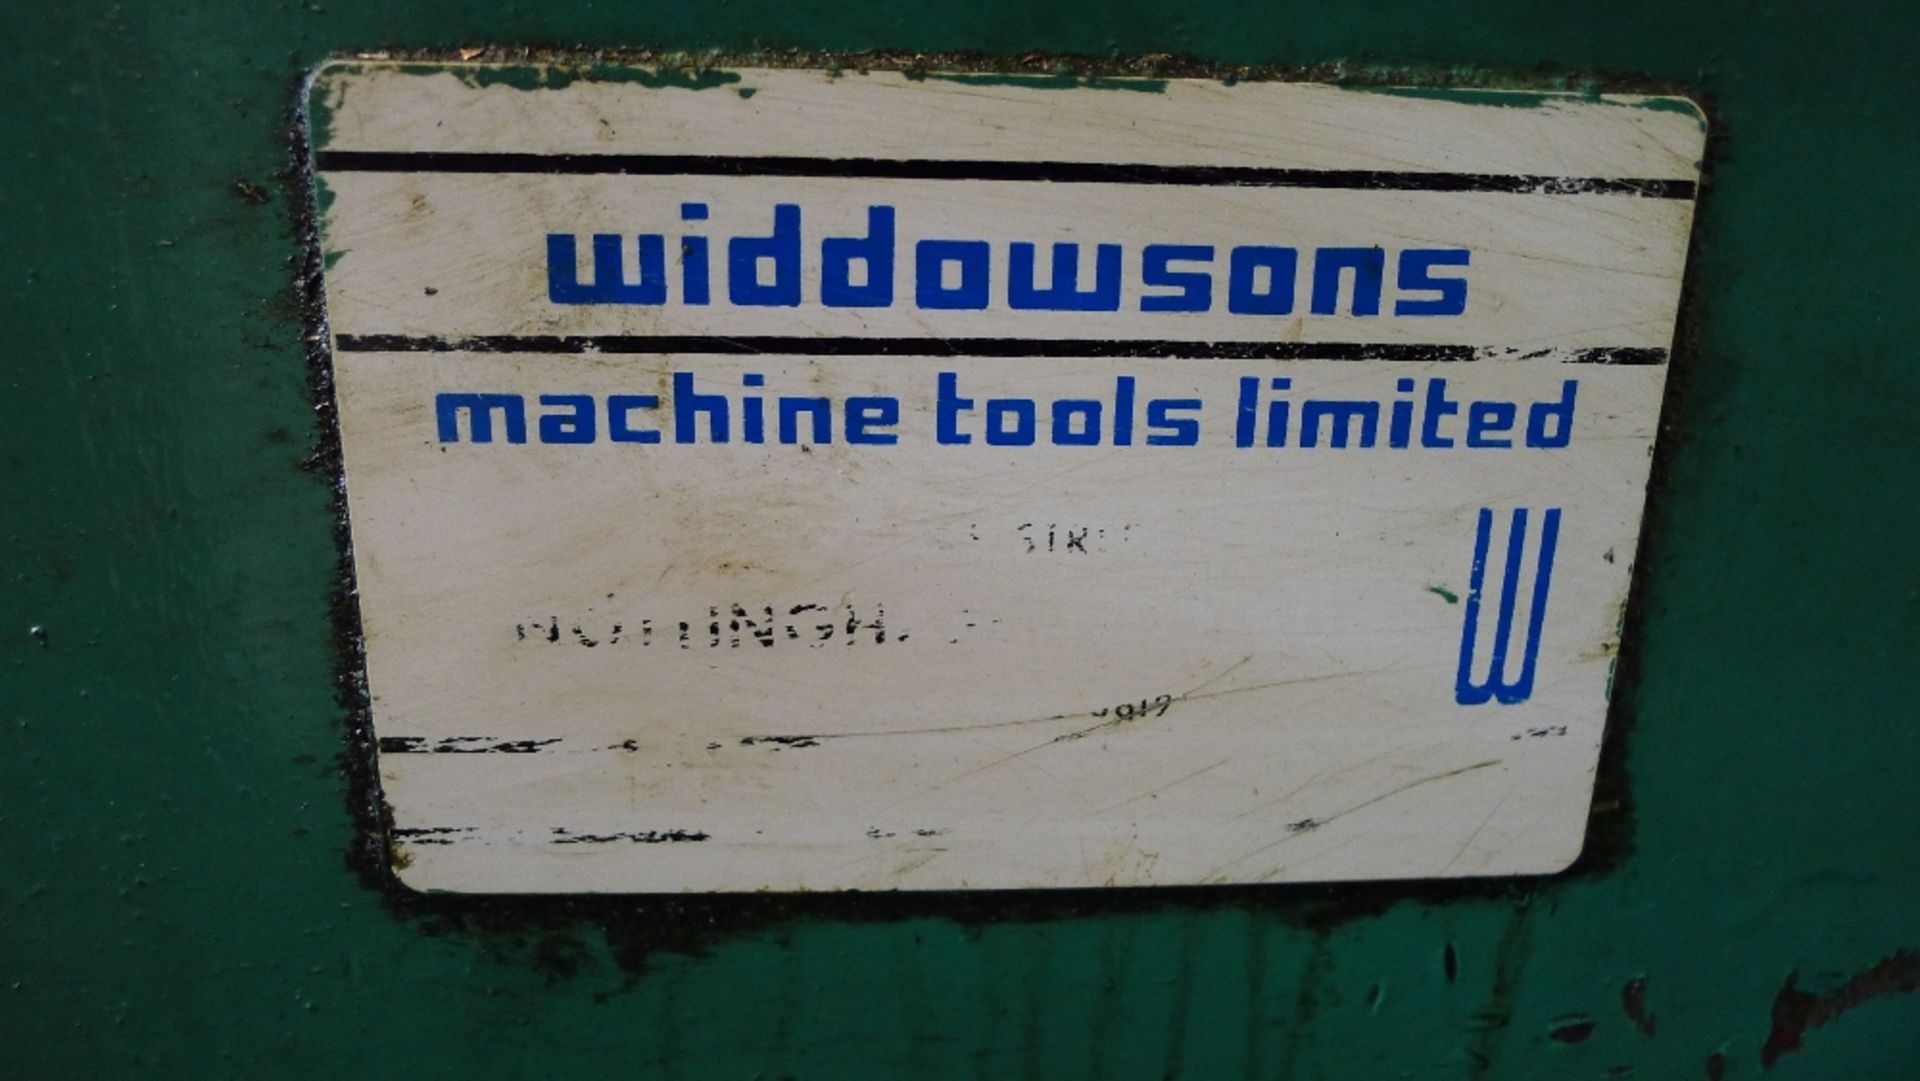 1 milling machine by Widdowsons (Bridgeport type) 3ph, table size 1.25m x 23cm, 830mm x 450mm - Image 3 of 12